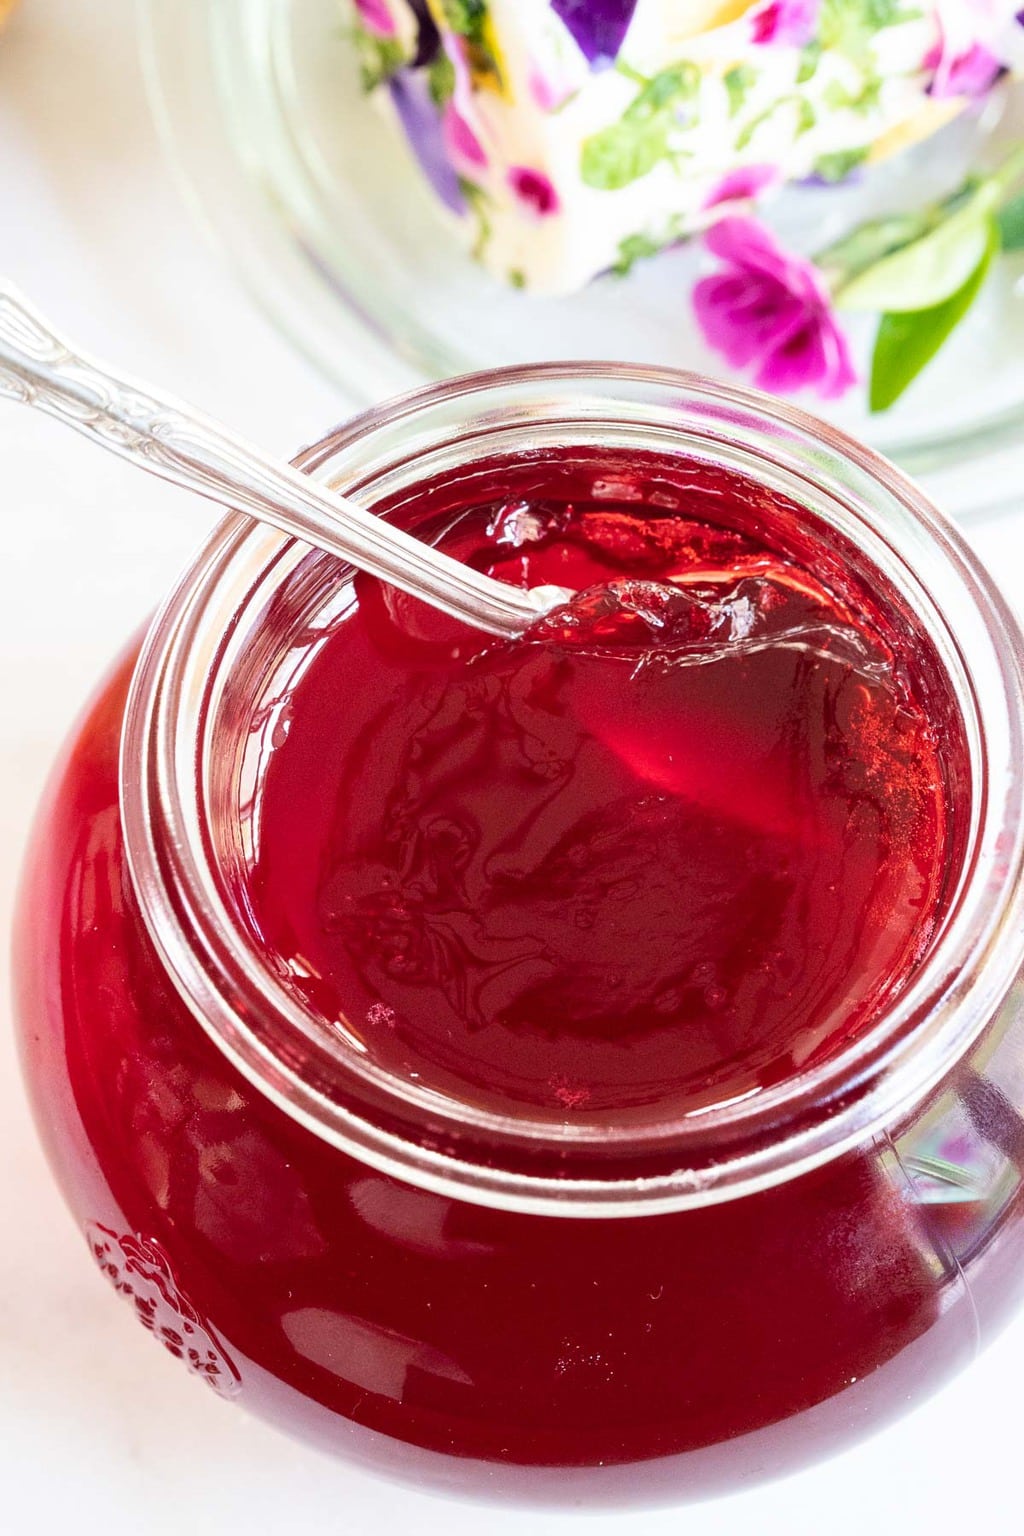 Vertical photo of a glass jar of Easy Blackberry Jelly with a spoon.